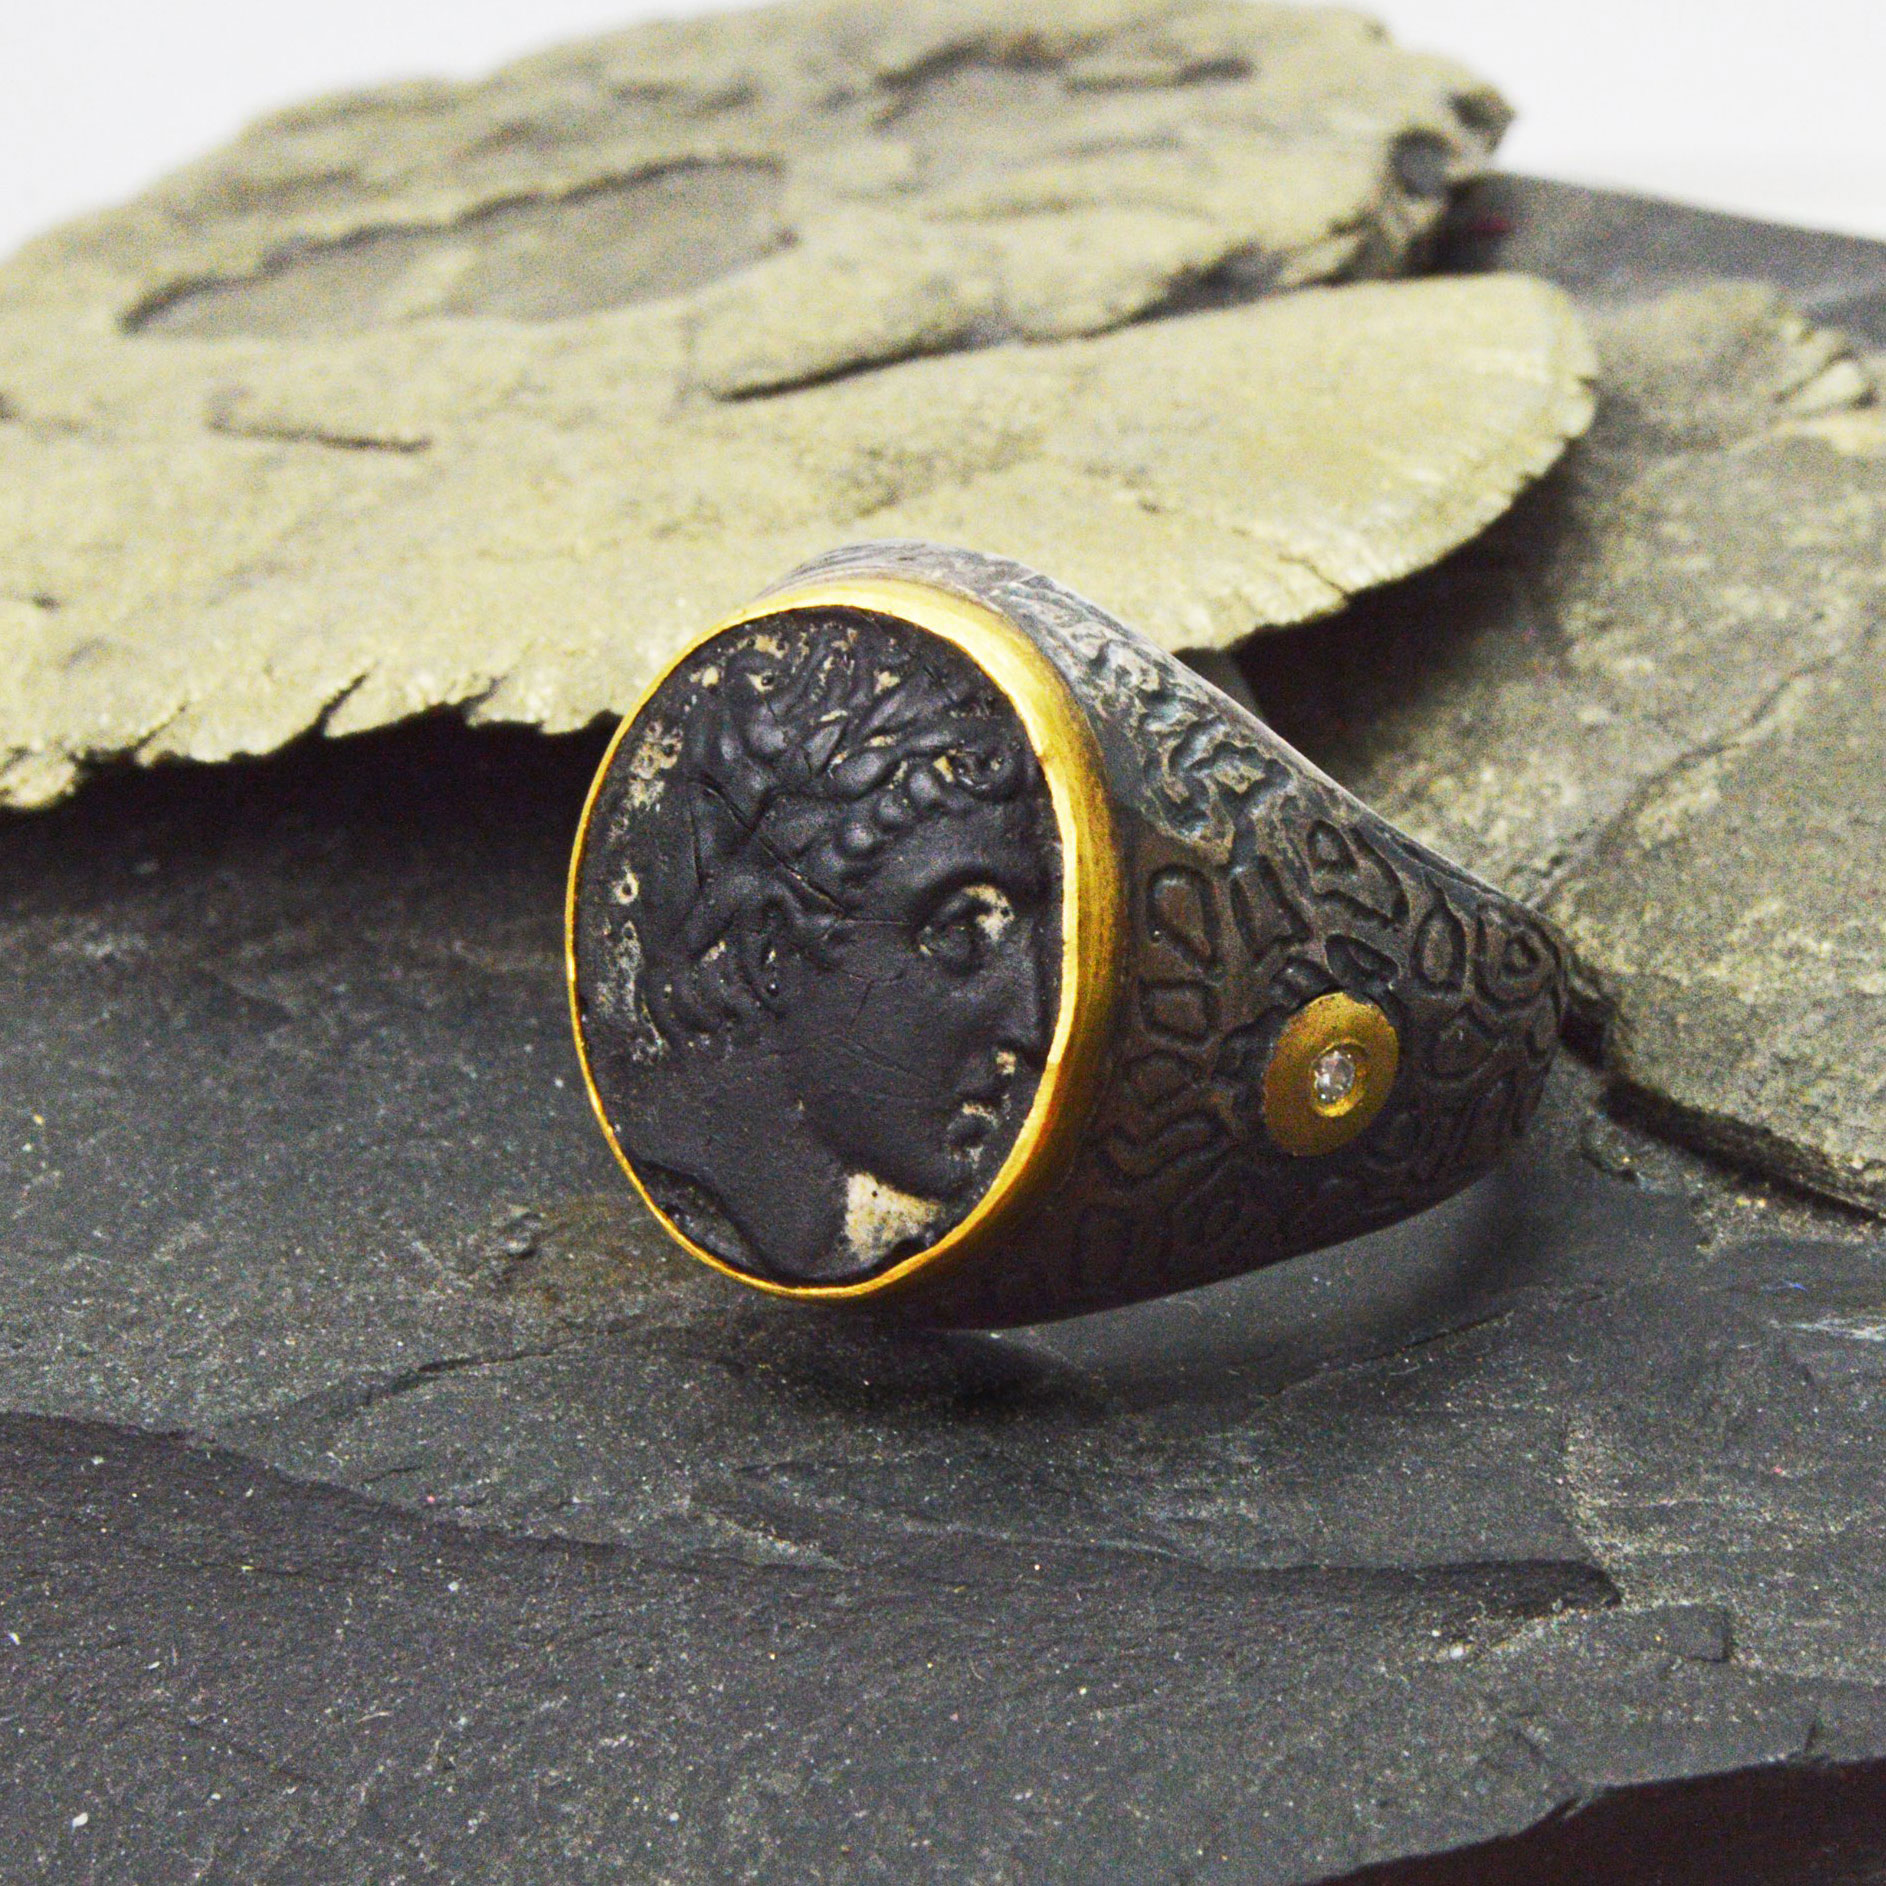 Carv ed onyx ring with intaglio portrait profile, oxidized sterling silver with an accent diamond and 24k gold